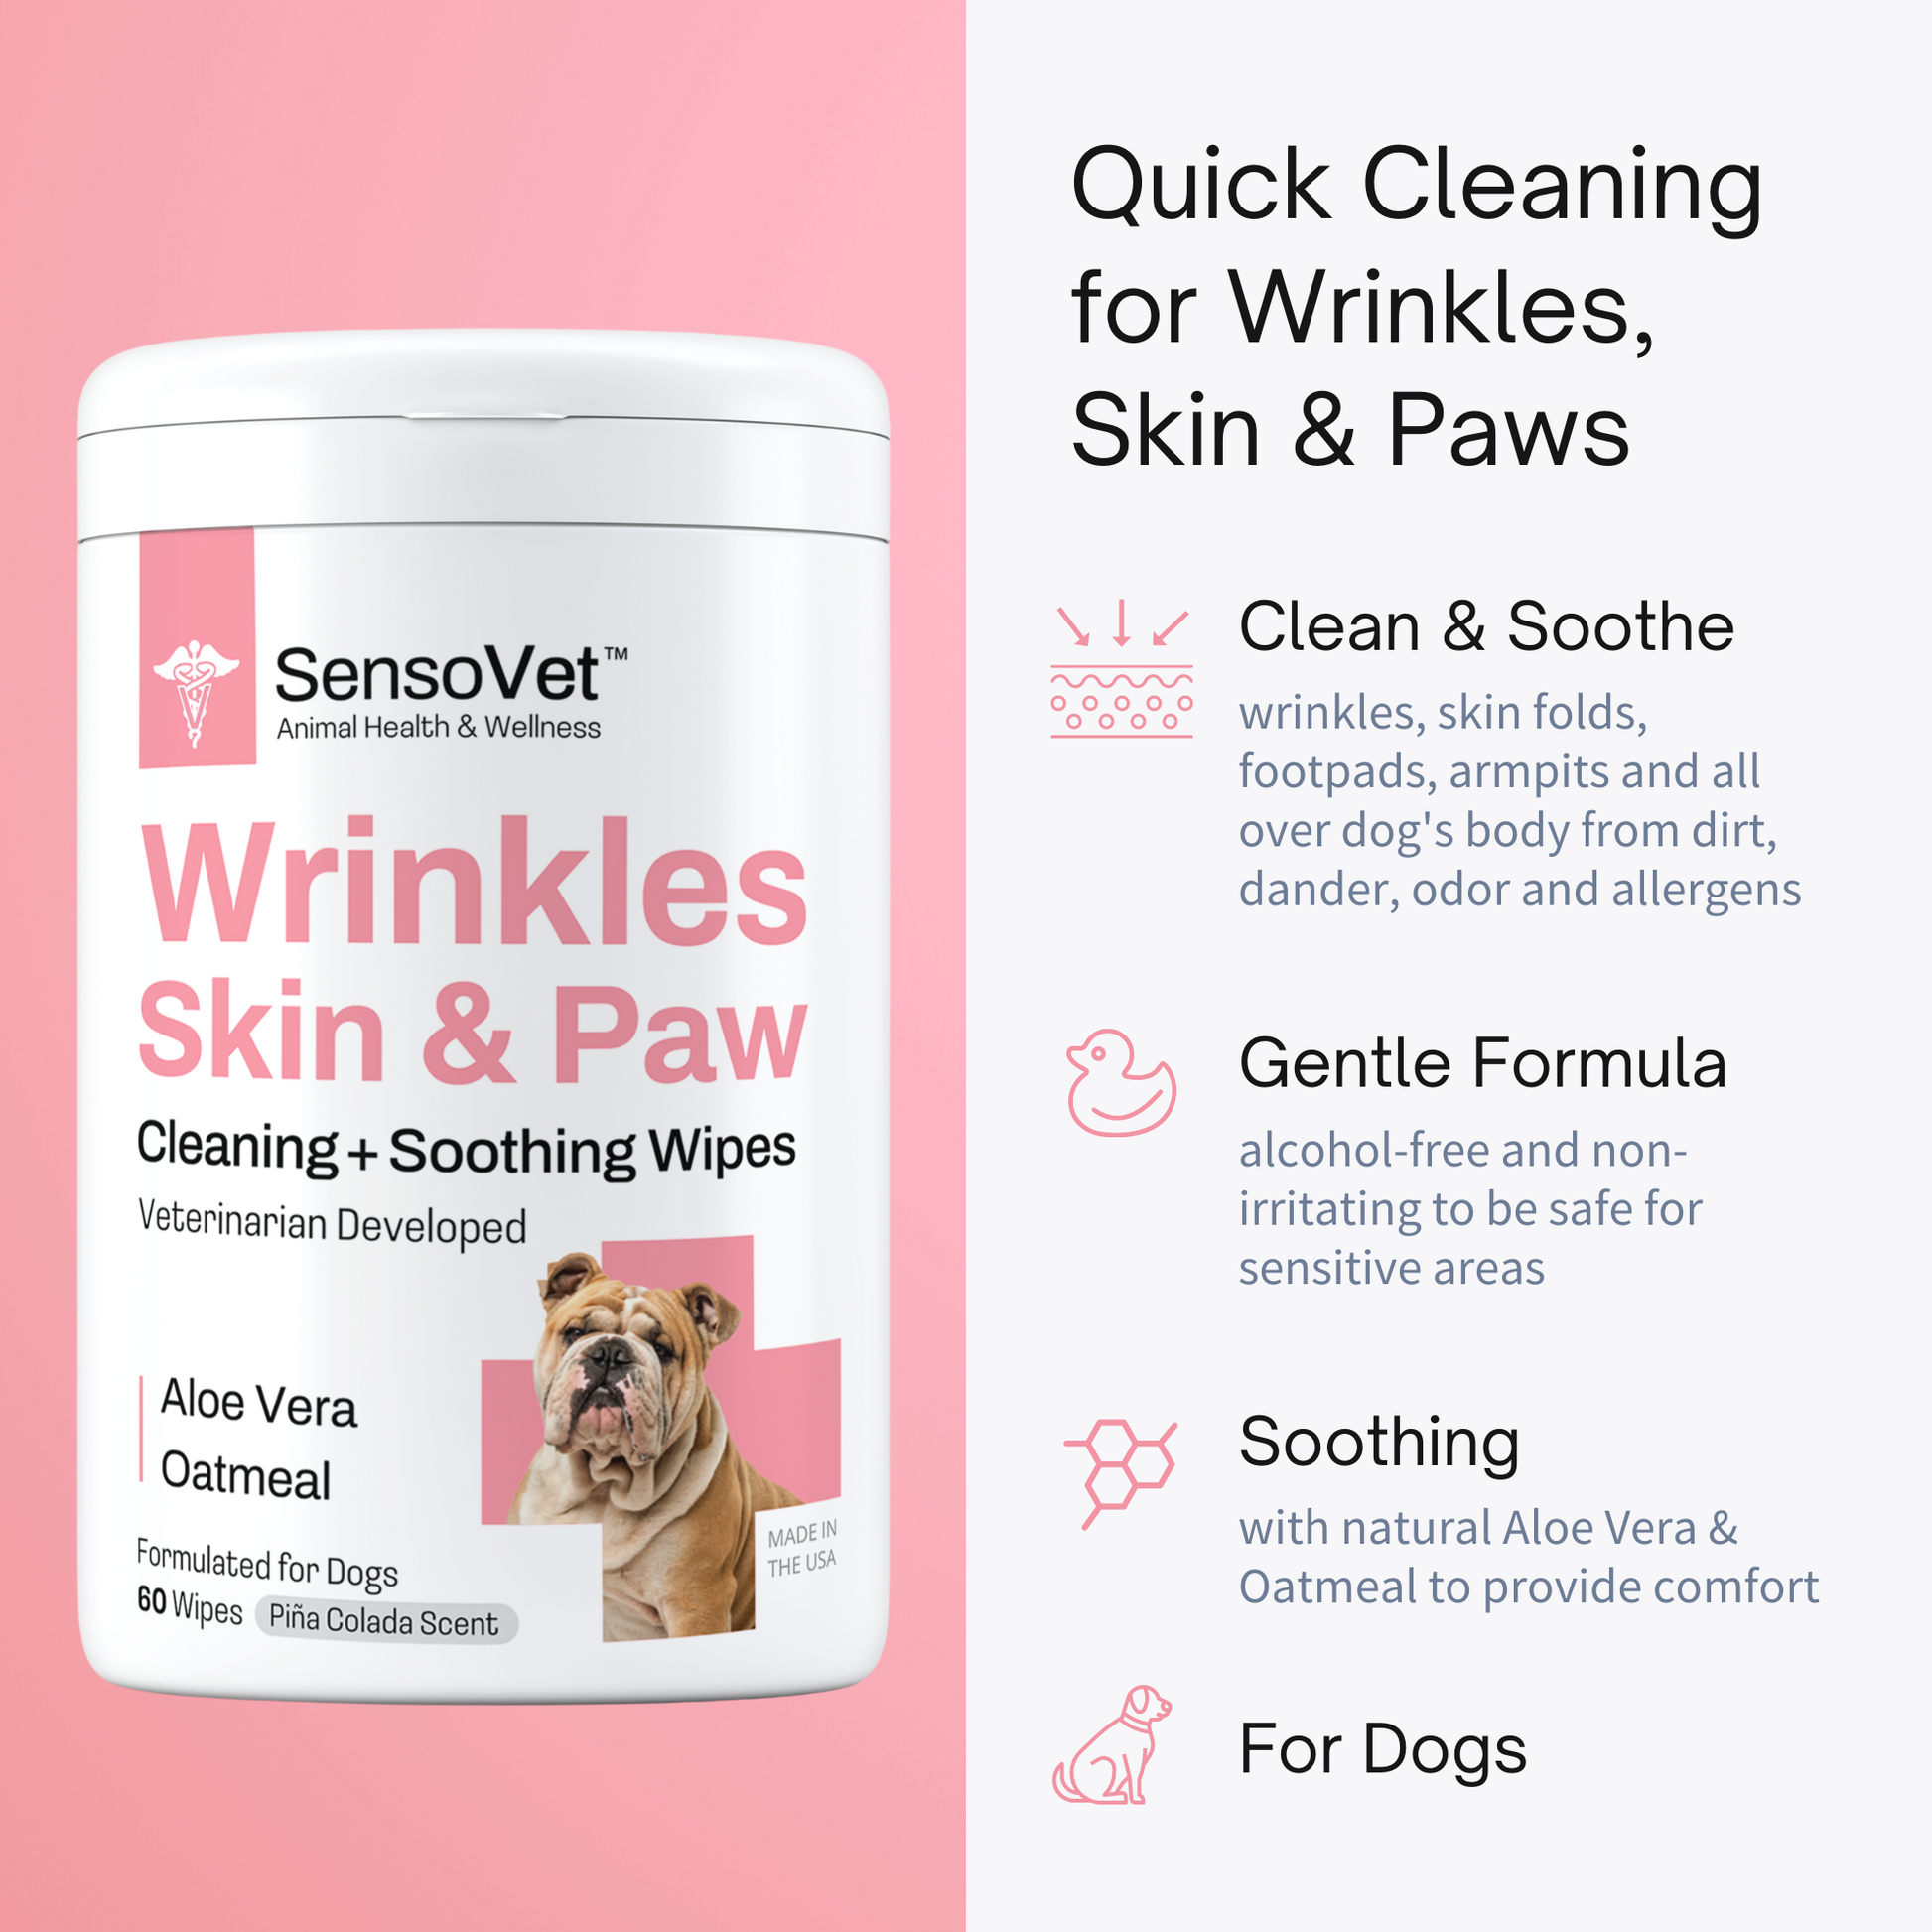 Quick cleaning for wrinkles, skin and paws